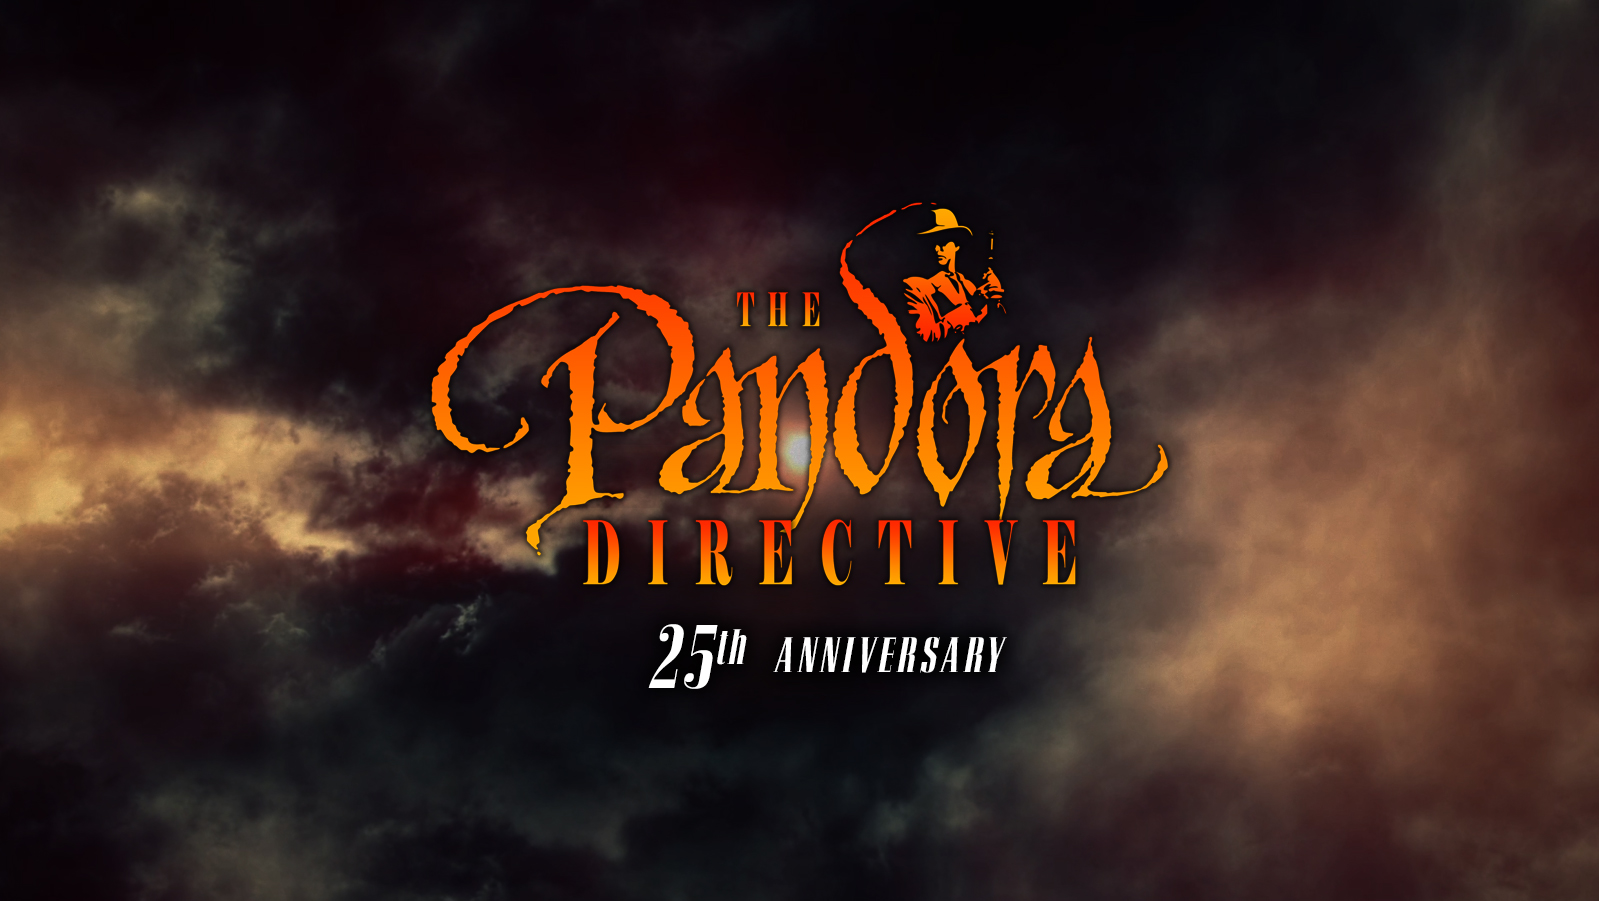 The Pandora Directive 25th Anniversary logo image. Logo appears in front of moody clouds similar to those used in the original Pandora Directive intro video.